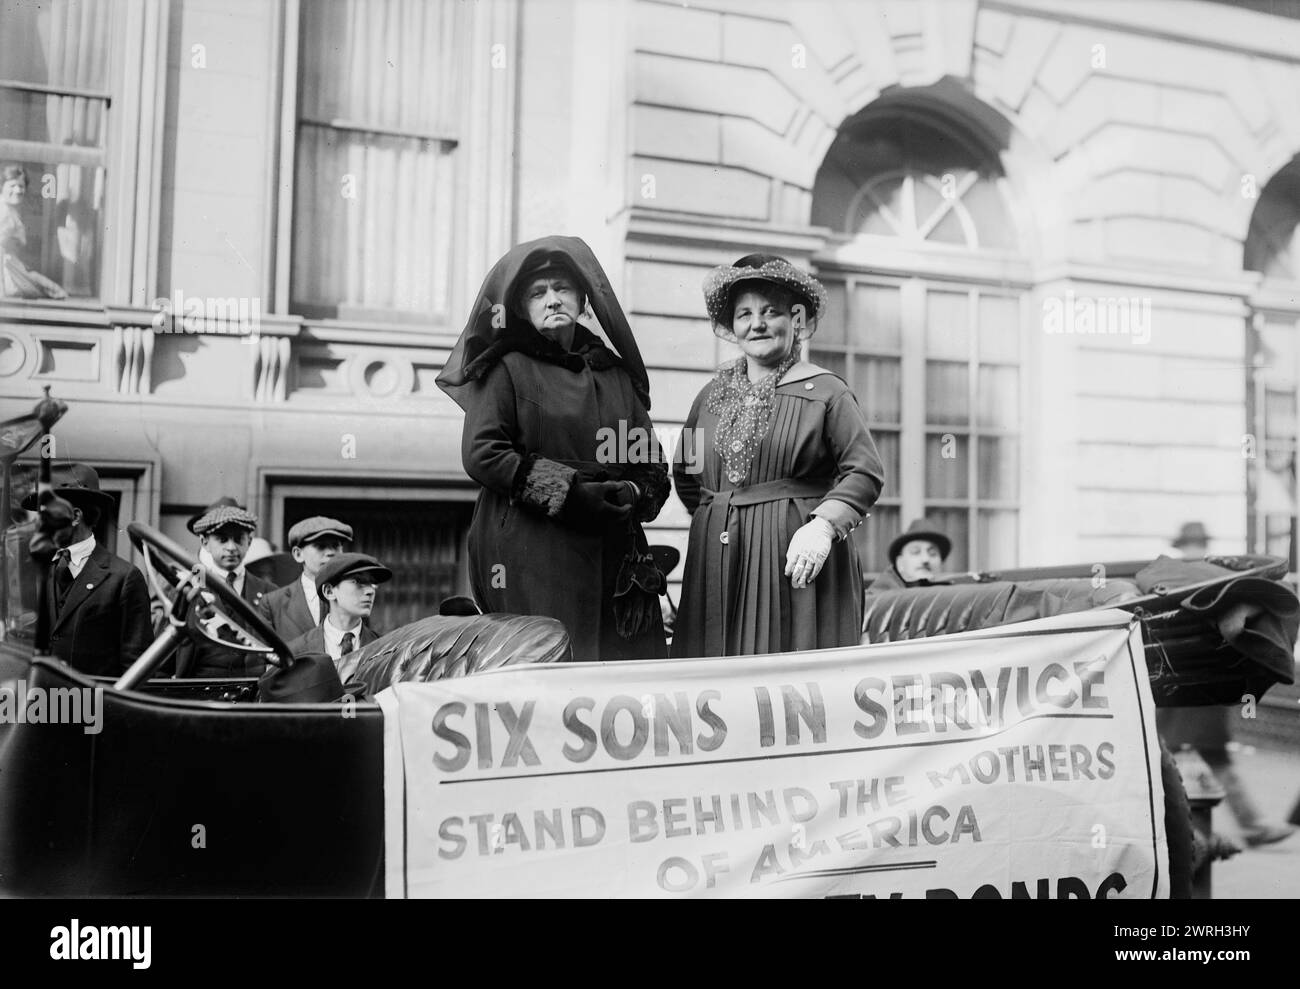 Mrs. Wm. Quinn &amp; Mrs. L. Rosenberg, 1918. Mrs. William Quinn, Great Neck, Long Island, and Mrs. Louis Rosenberg, North Bergen, New Jersey, each of whom had six sons serving in the military during World War I, at the head of the Service Flag parade up 5th Avenue, New York City. Stock Photo